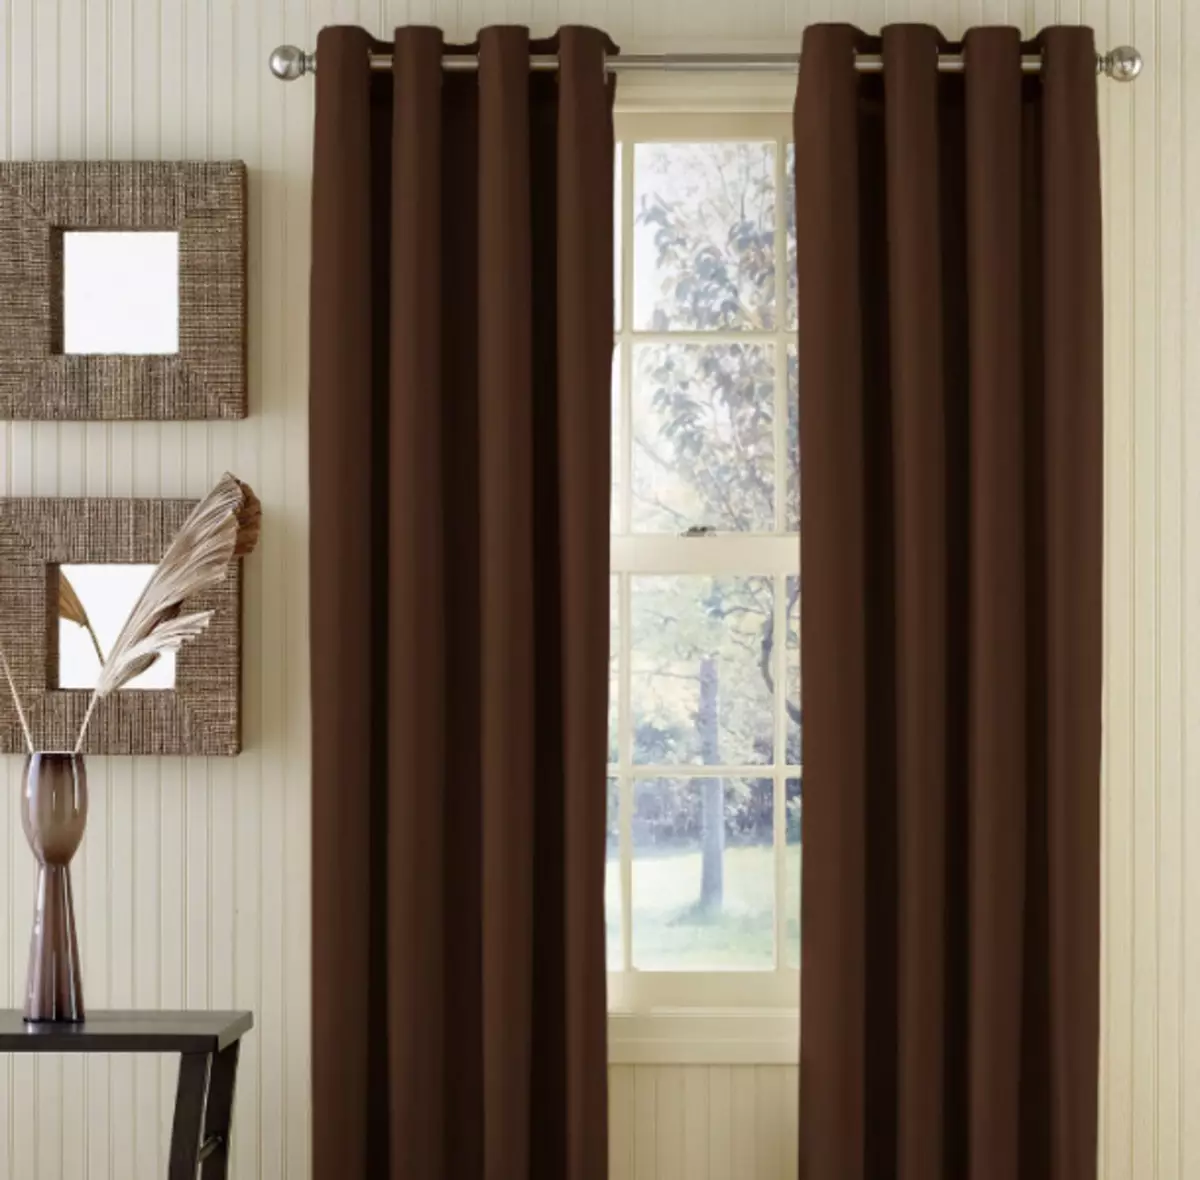 What pick up a dense tissue for curtains - velor or cotton?